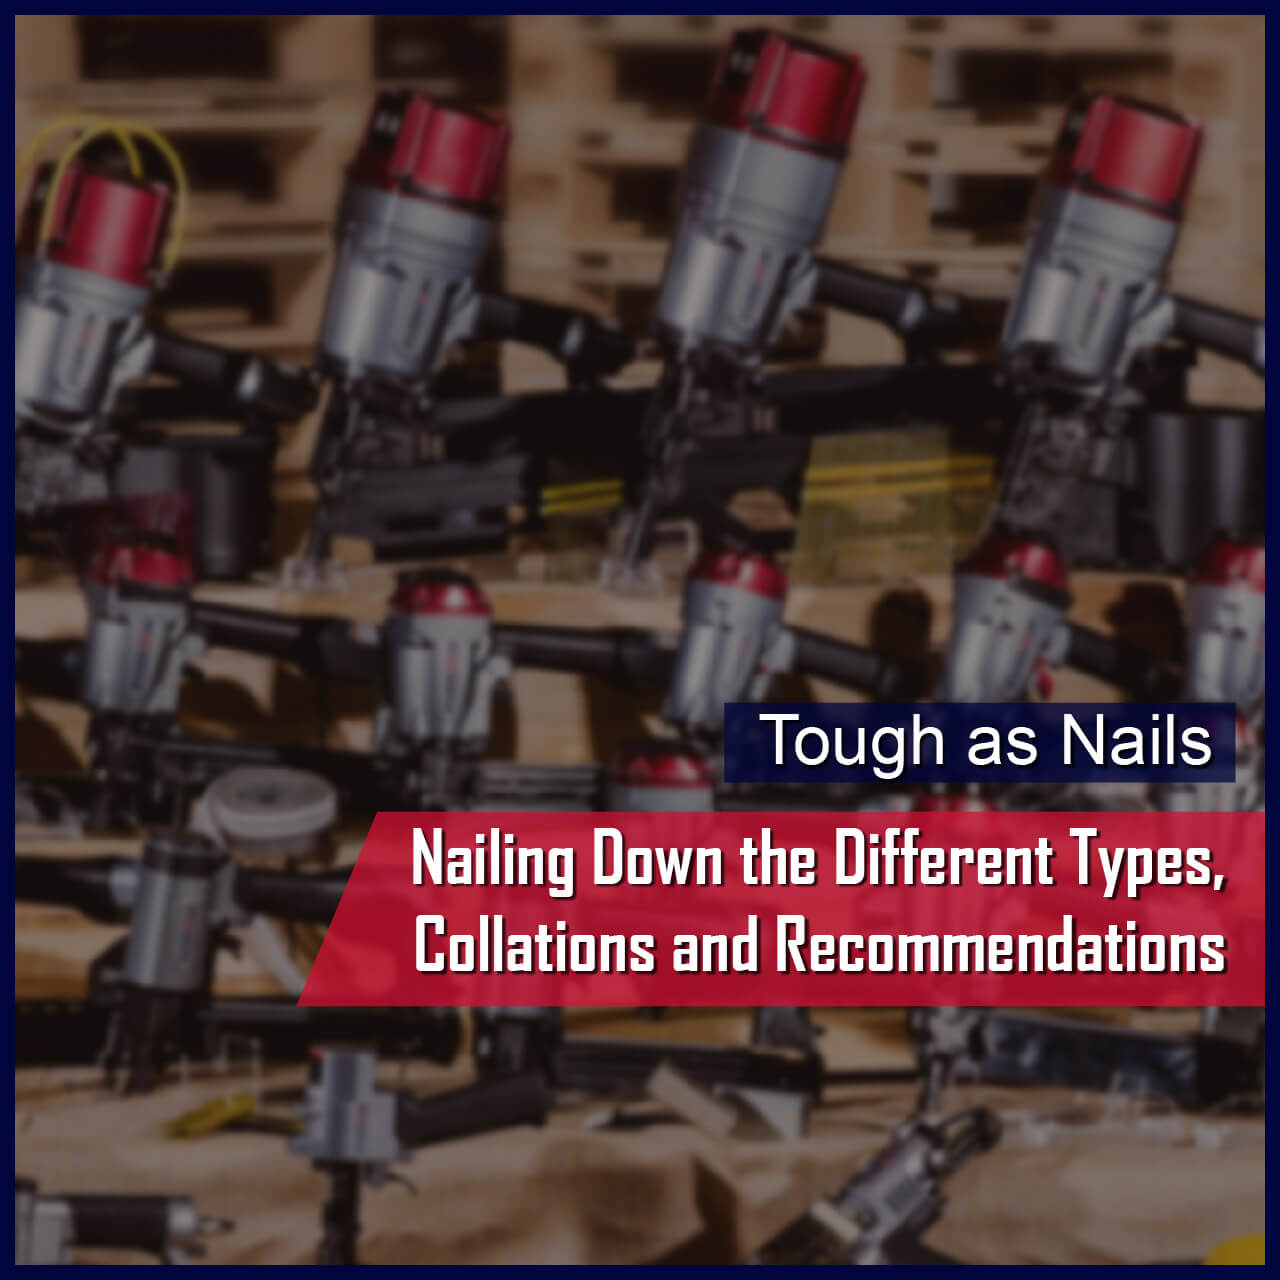 Tough as Nails: Nailing Down the Different Types, Collations and Recommendations.